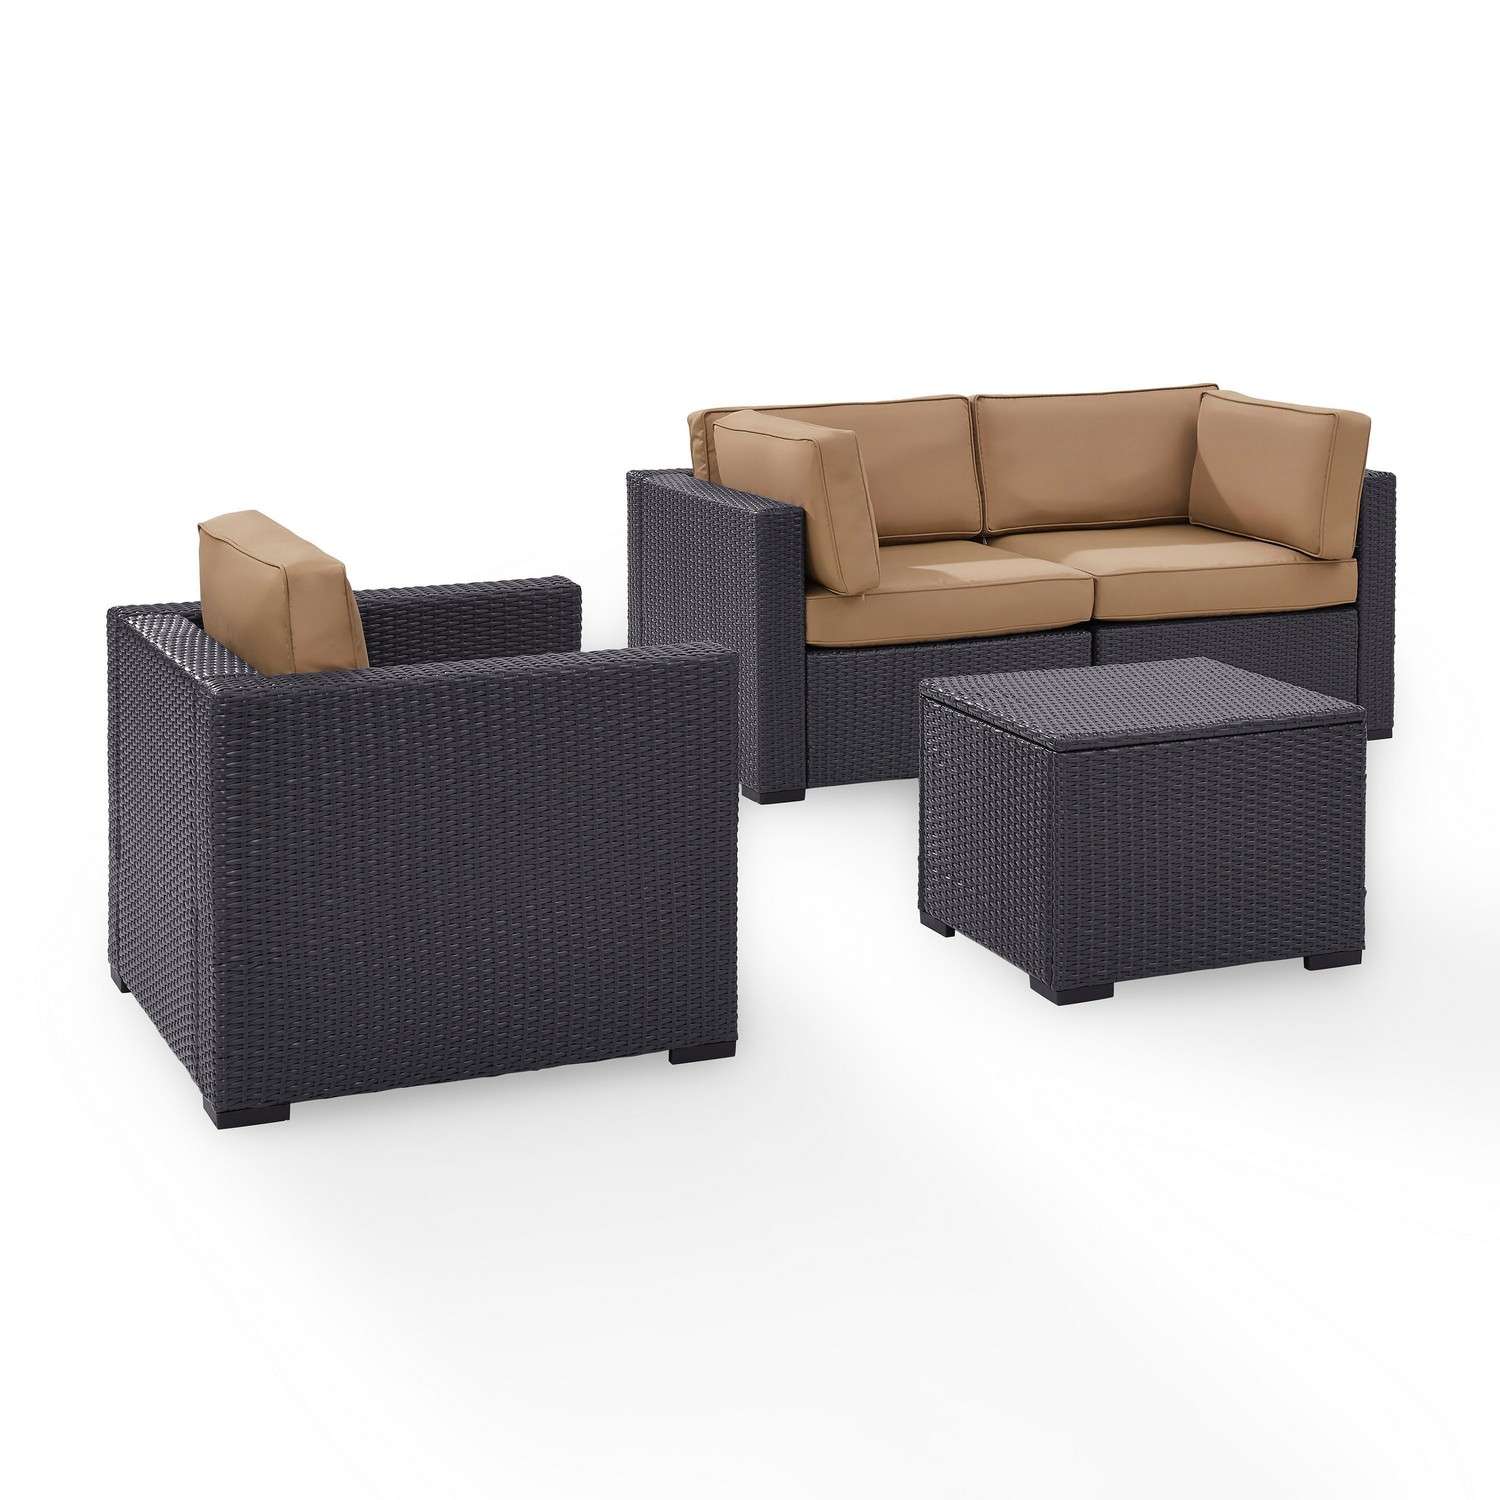 Crosley Biscayne 4-PC Outdoor Wicker Sectional Set - 2 Corner Chairs, Arm Chair, Coffee Table - Mocha/Brown